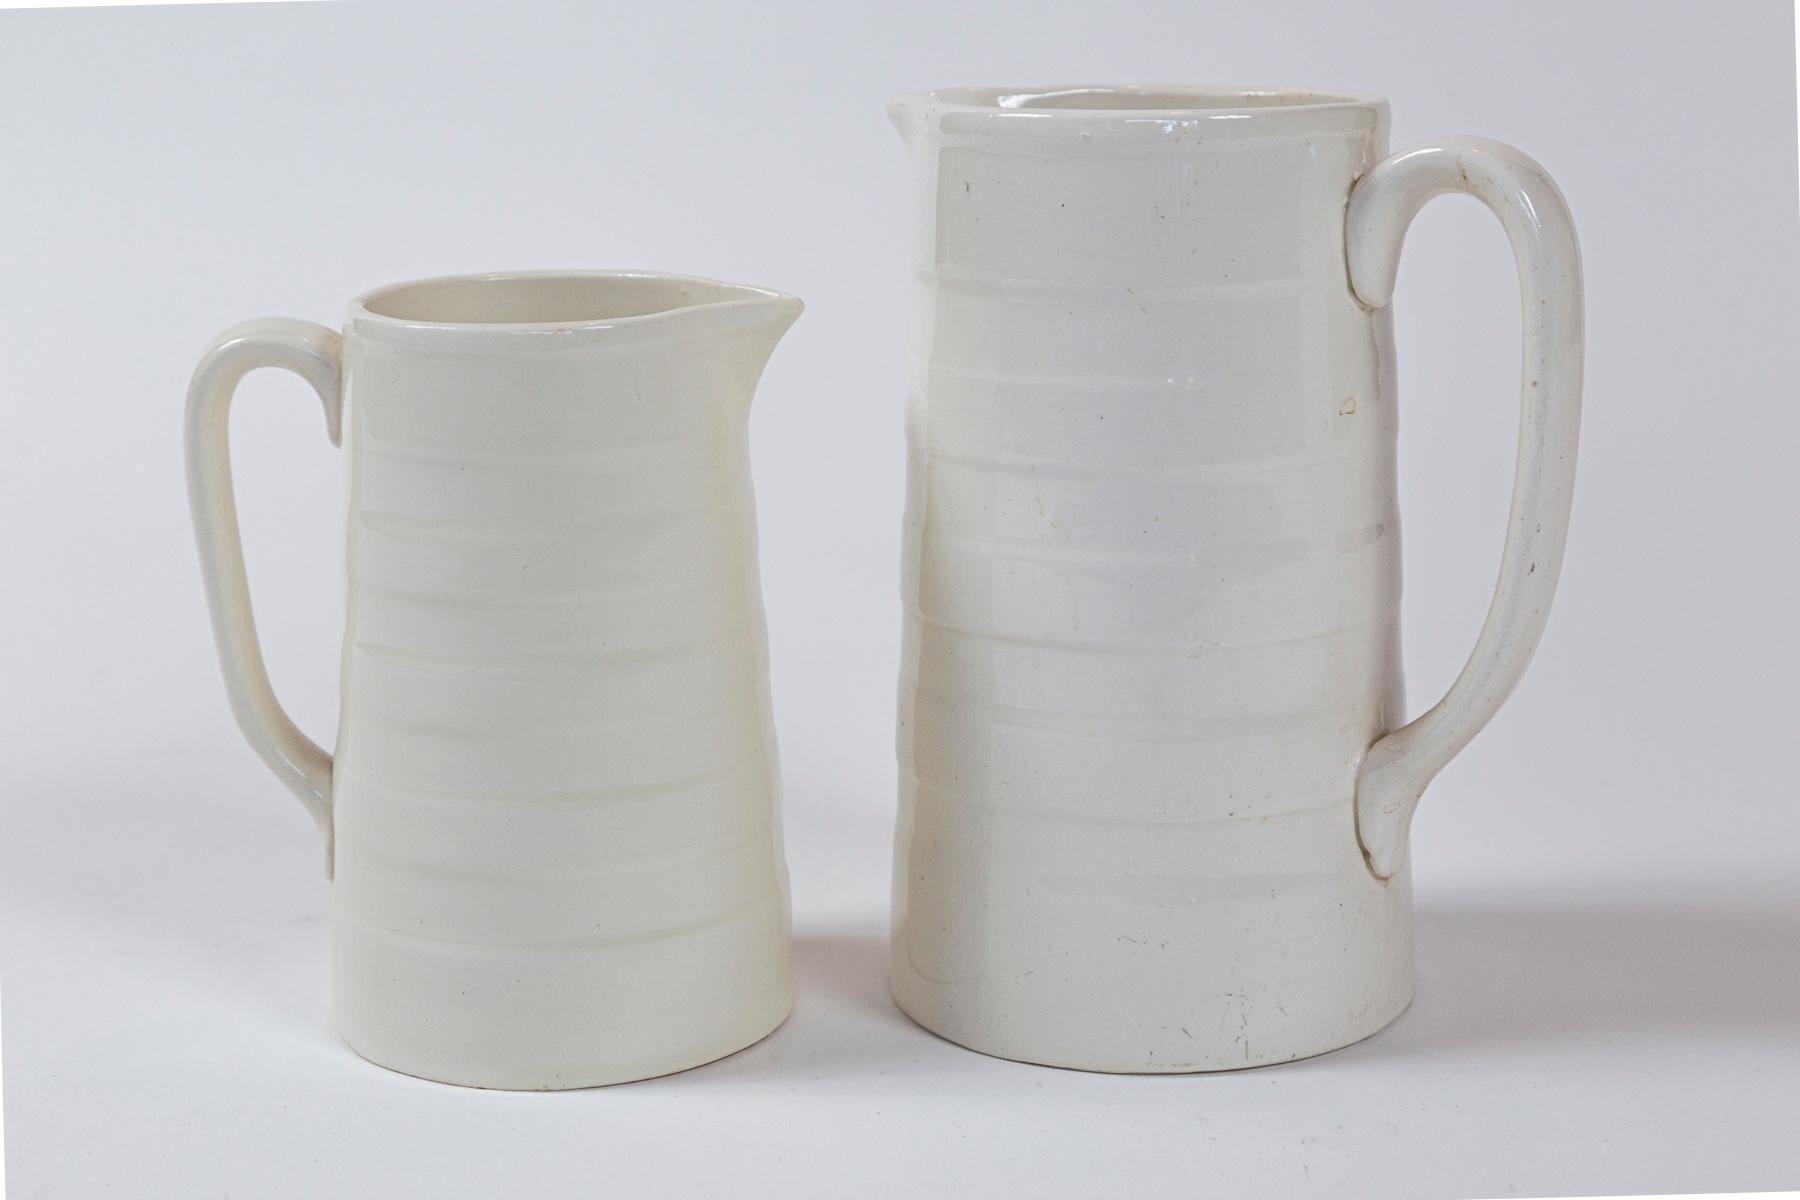 Two English Ironstone Dairy Pitchers, circa 1920s. Banded, white ironstone, straight sided pitchers.